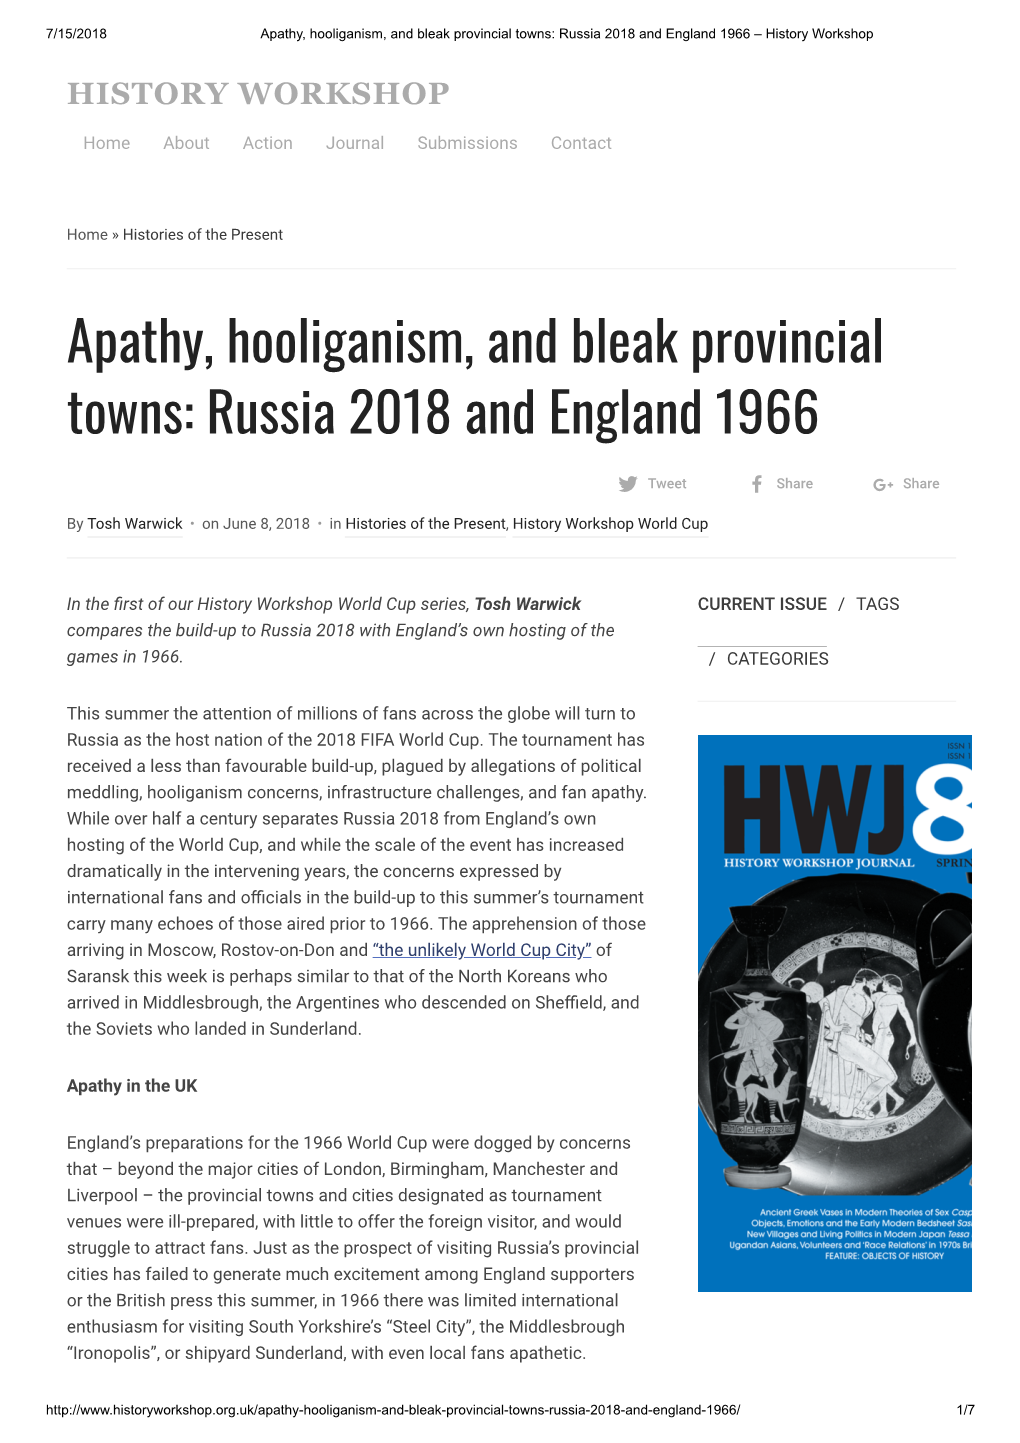 Apathy, Hooliganism, and Bleak Provincial Towns: Russia 2018 and England 1966 – History Workshop